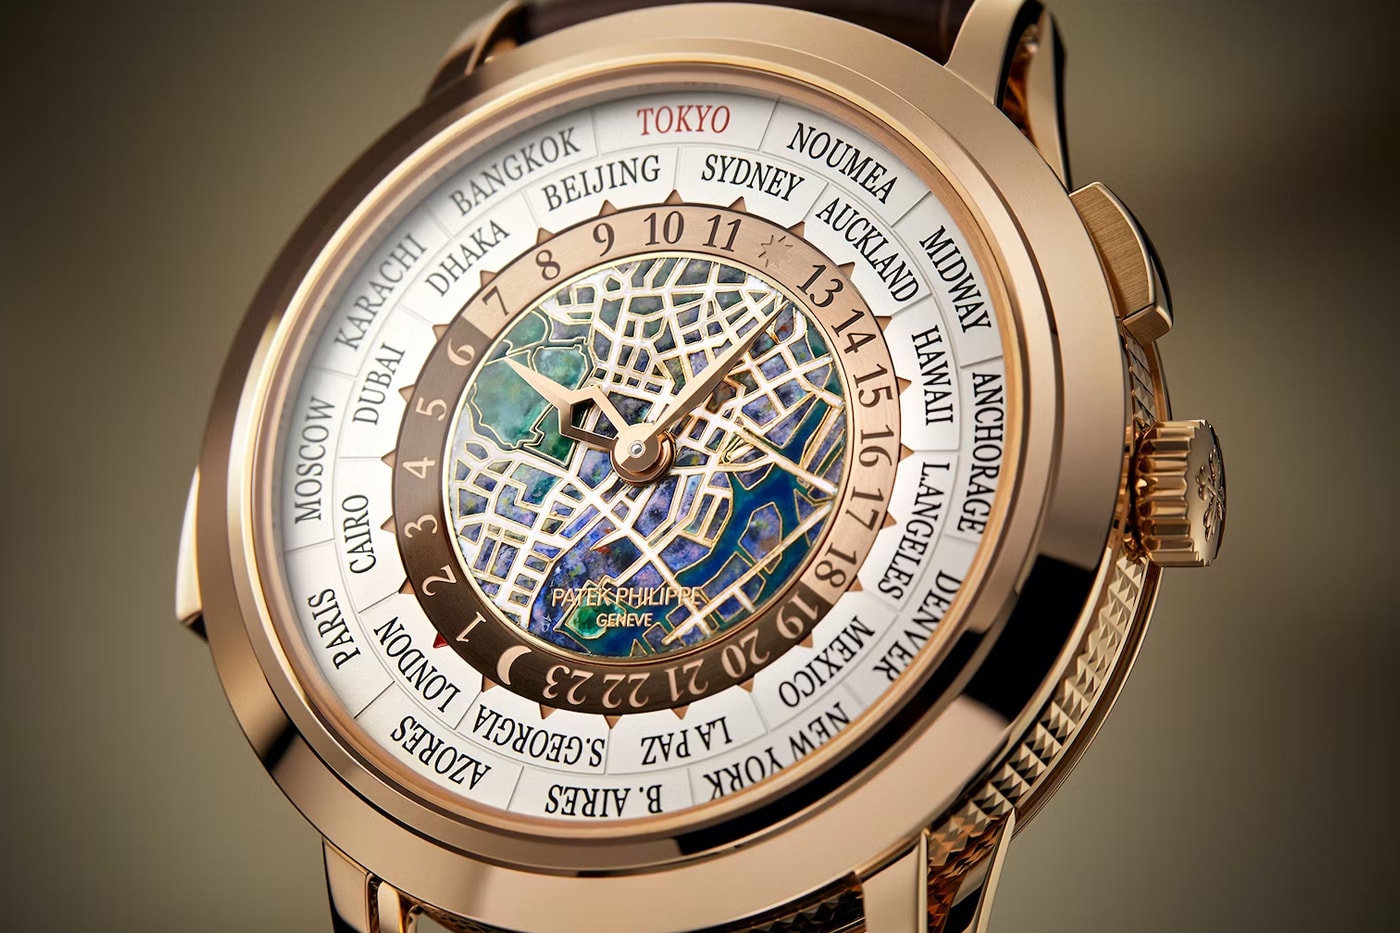 Patek Philippe Watch Art Grand Exhibition Tokyo Special Releases Ref. 5308 Minute Repeater Split-Seconds Chronograph Instantaneous Perpetual Calendar Ref. 5331 World Time Minute Repeater Rare Handcrafts Ref. 5330 World Time Date